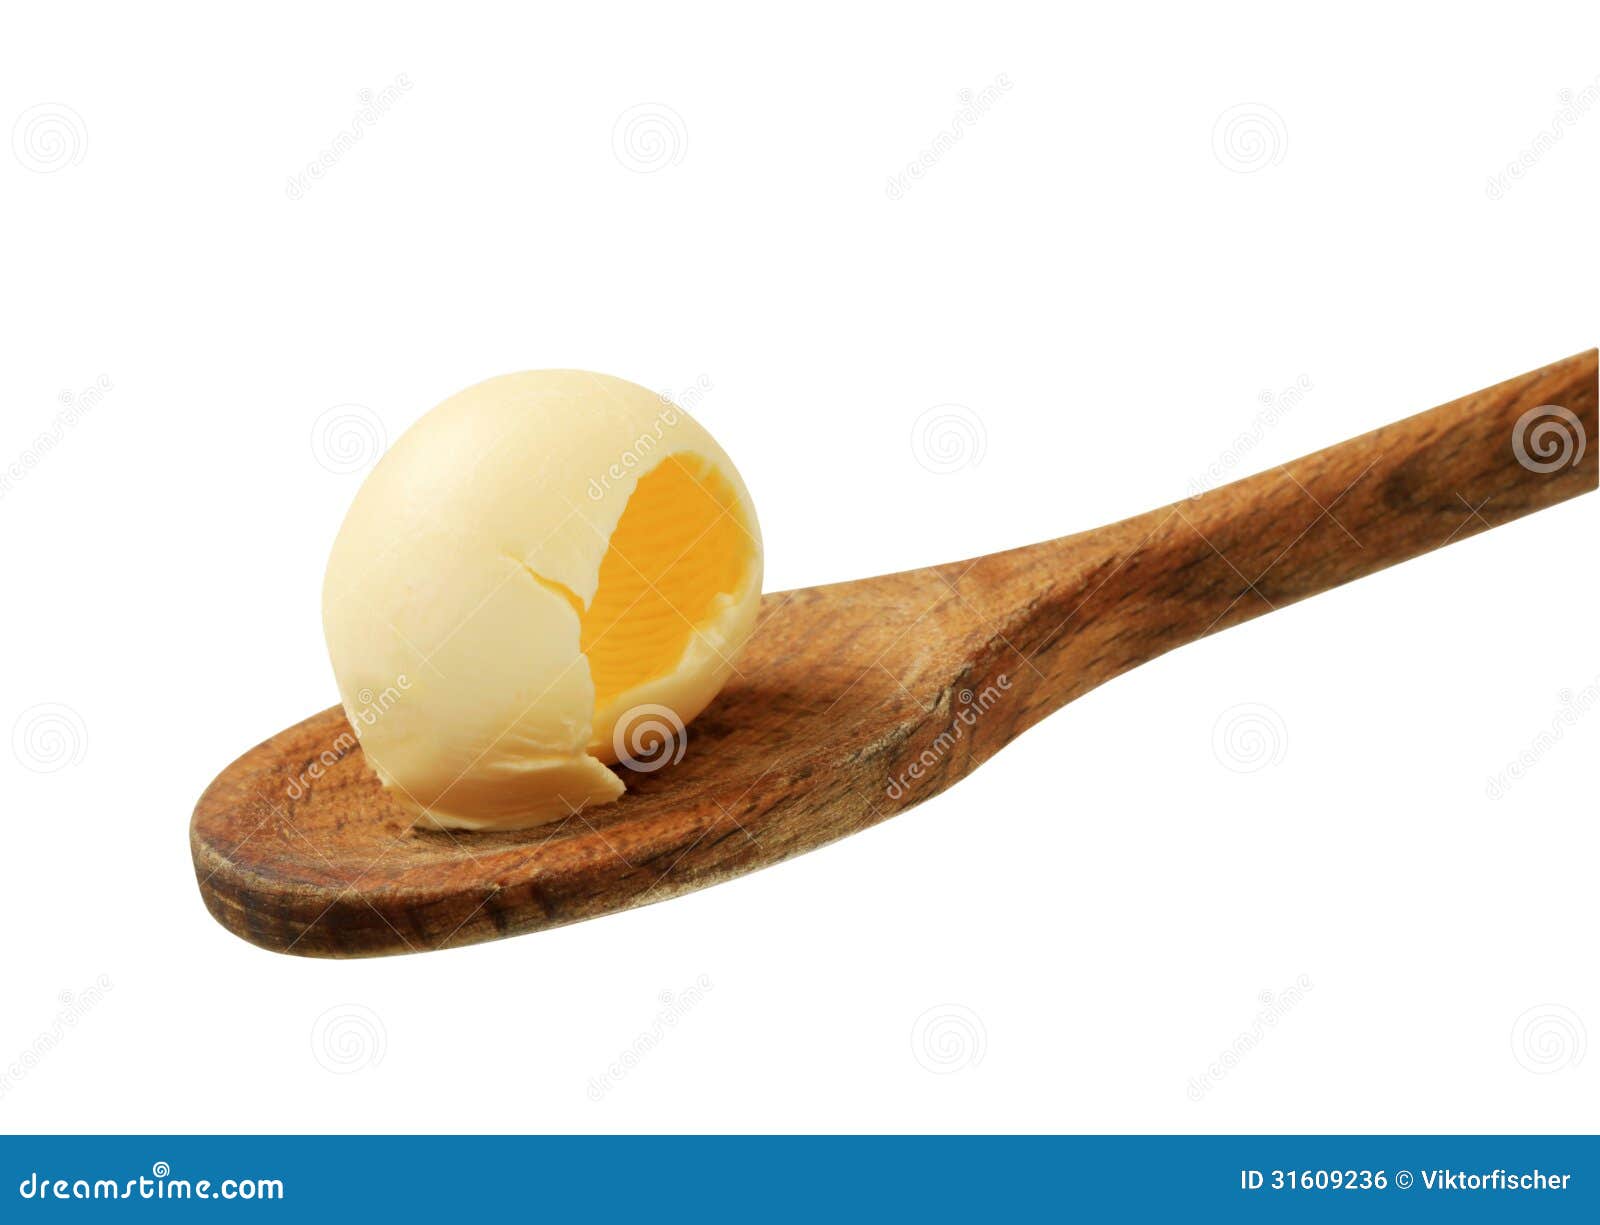  Butter  Curl On A Wooden Spoon  Stock Photo Image of curl 